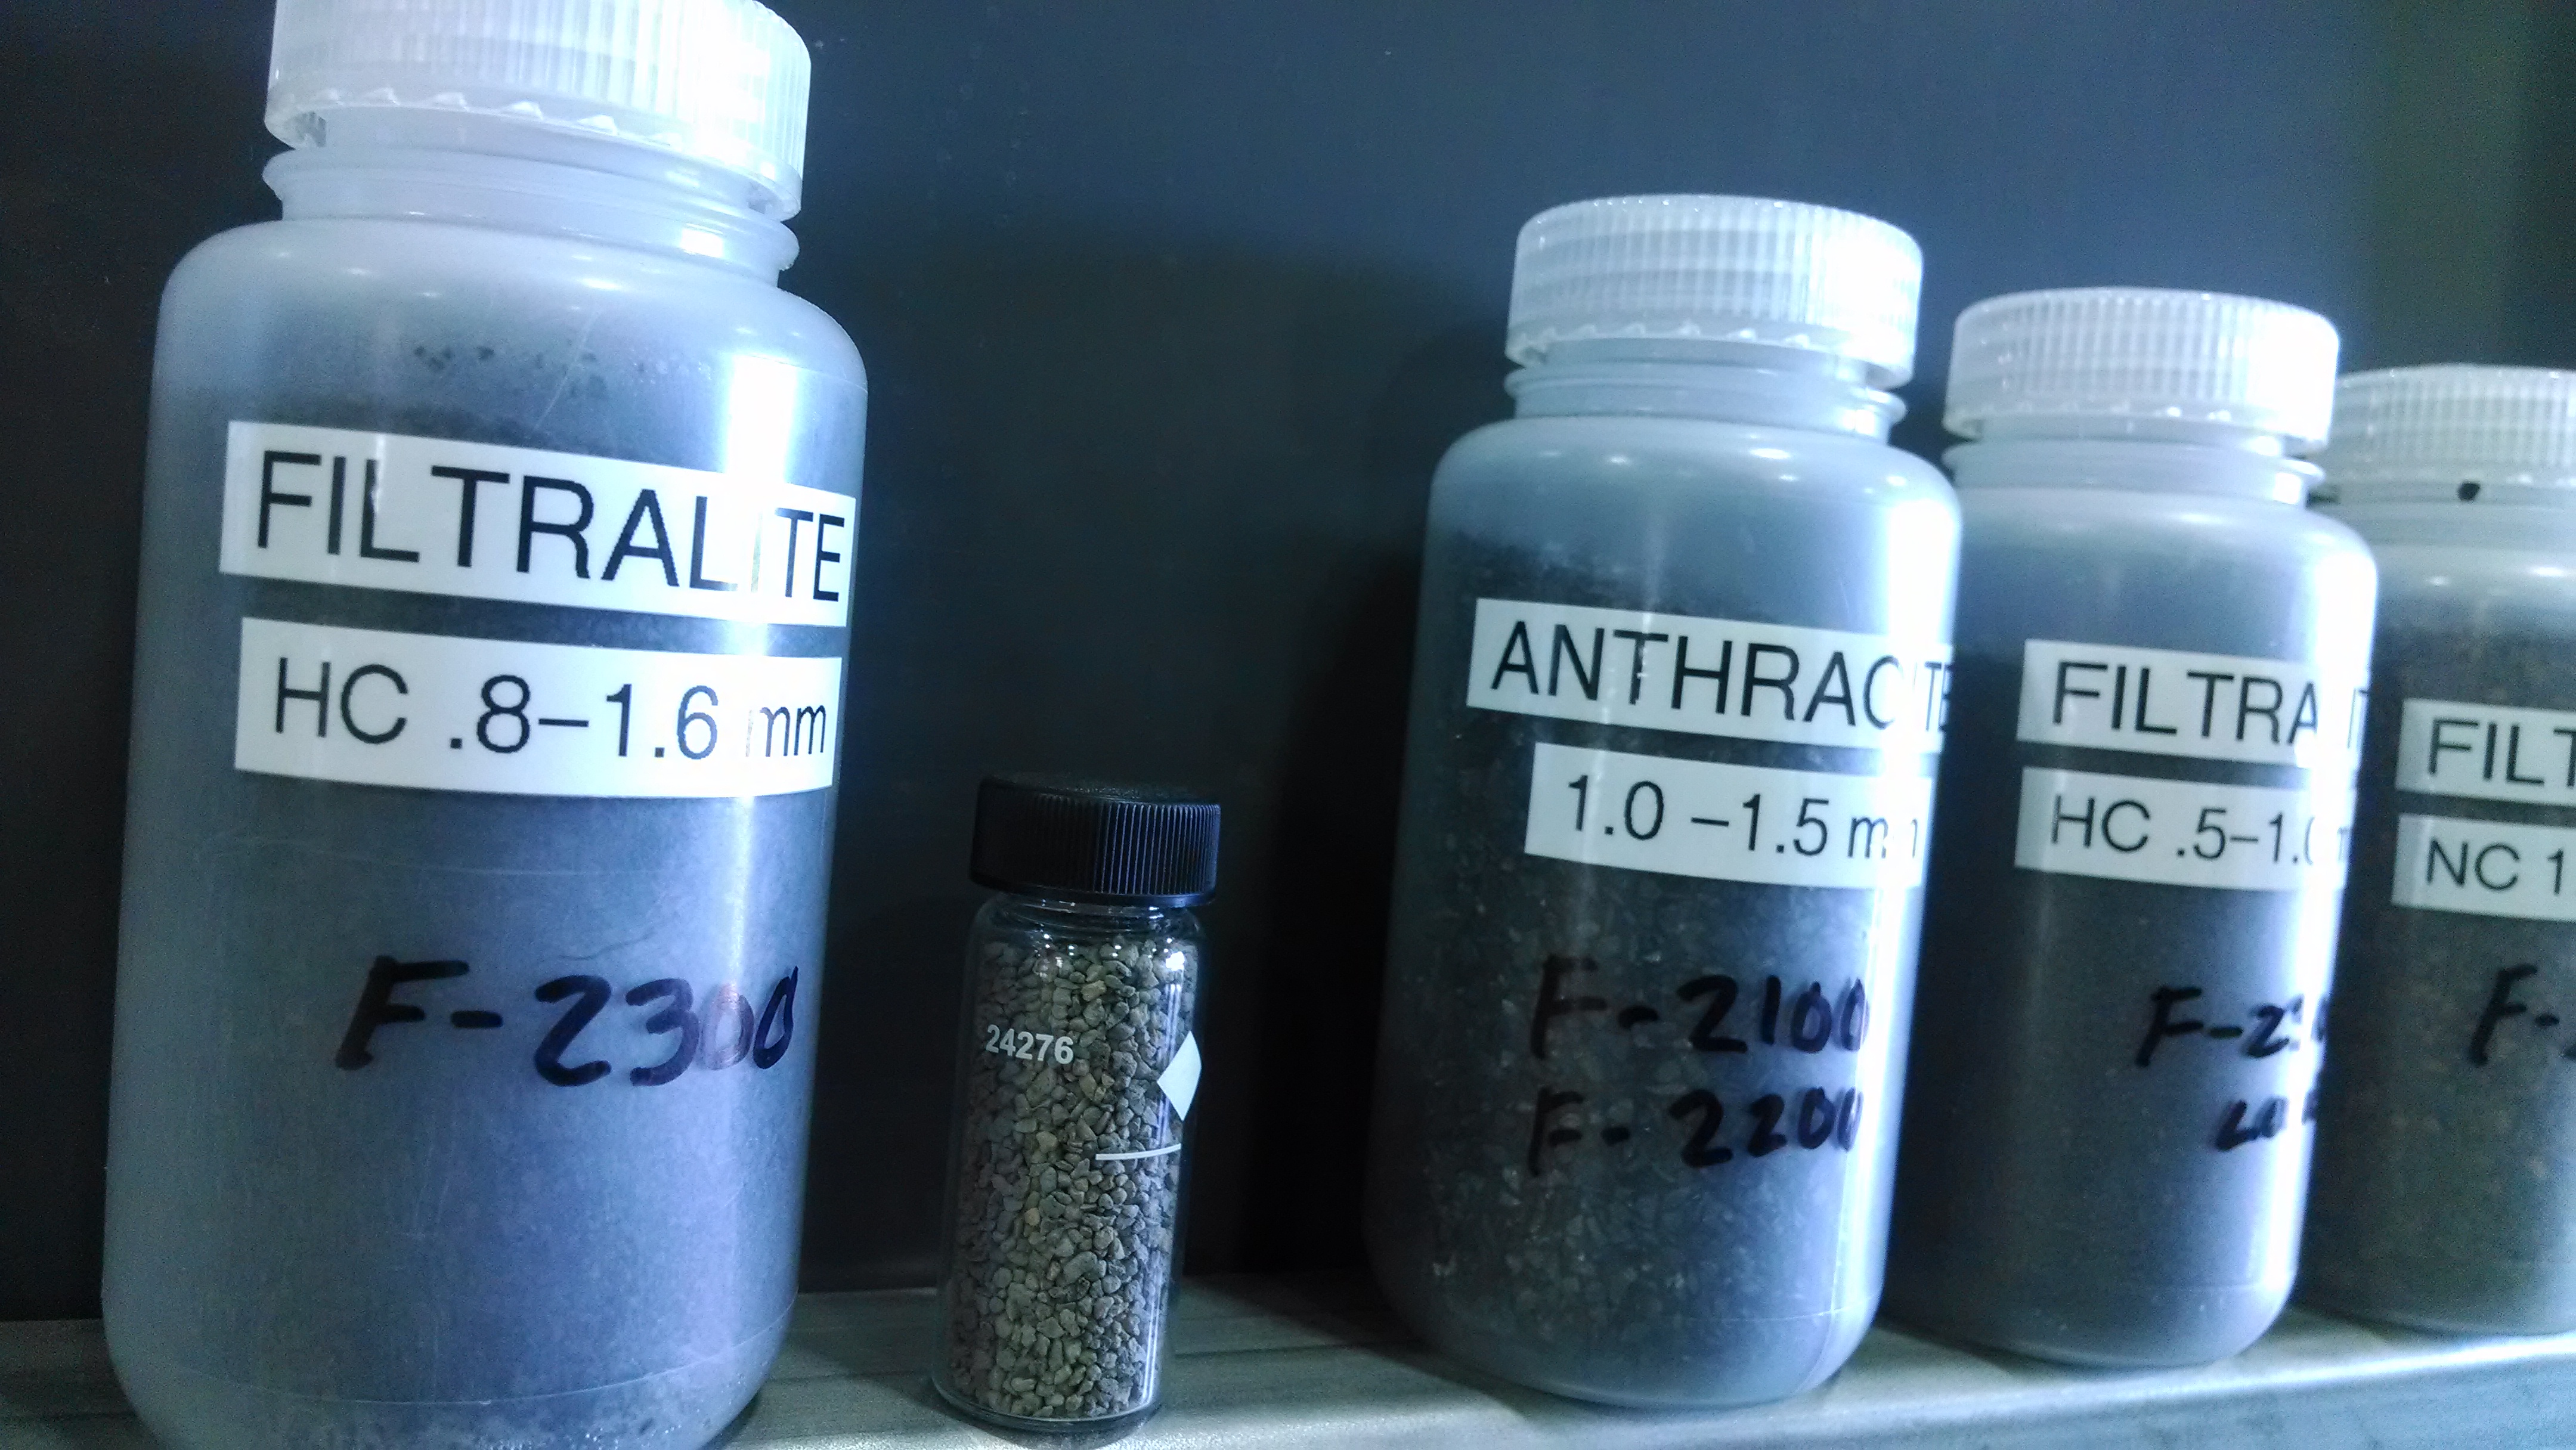 Plastic and glass vials marked with the names of the filter material and the sizes, which are about 1 milimeter.